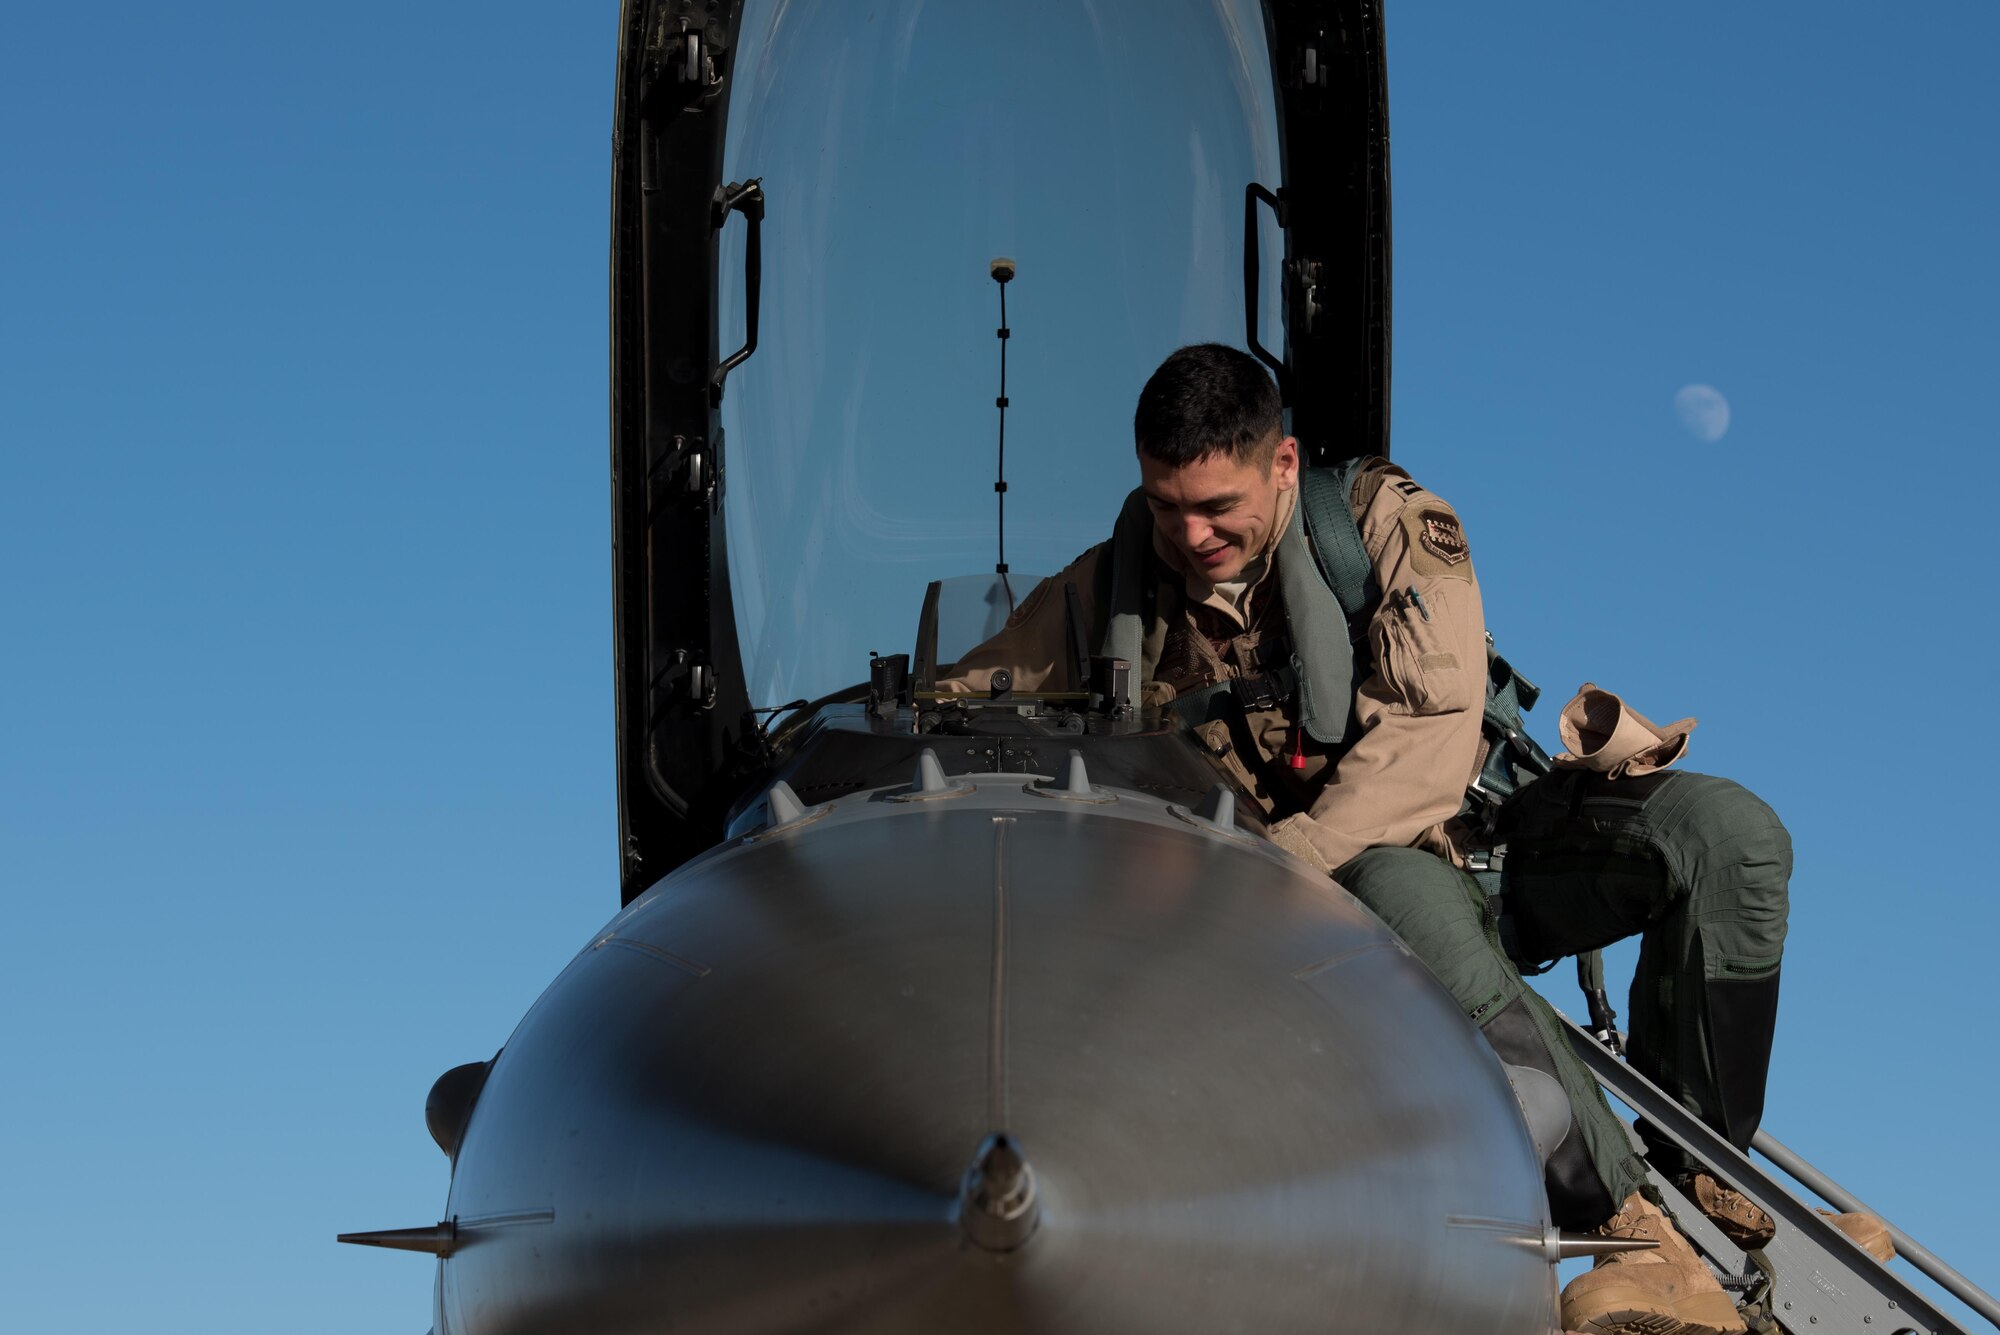 An F-16 Fighting Falcon pilot with the 134th Expeditionary Fighter Squadron removes exits his aircraft after arriving at the 407th Air Expeditionary Group, Southwest Asia, Dec. 10, 2016. The F-16 squadron is comprised of Airmen from the 158th Fighter Wing of the Vermont Air National Guard. (U.S. Air Force photo by Master Sgt. Benjamin Wilson)